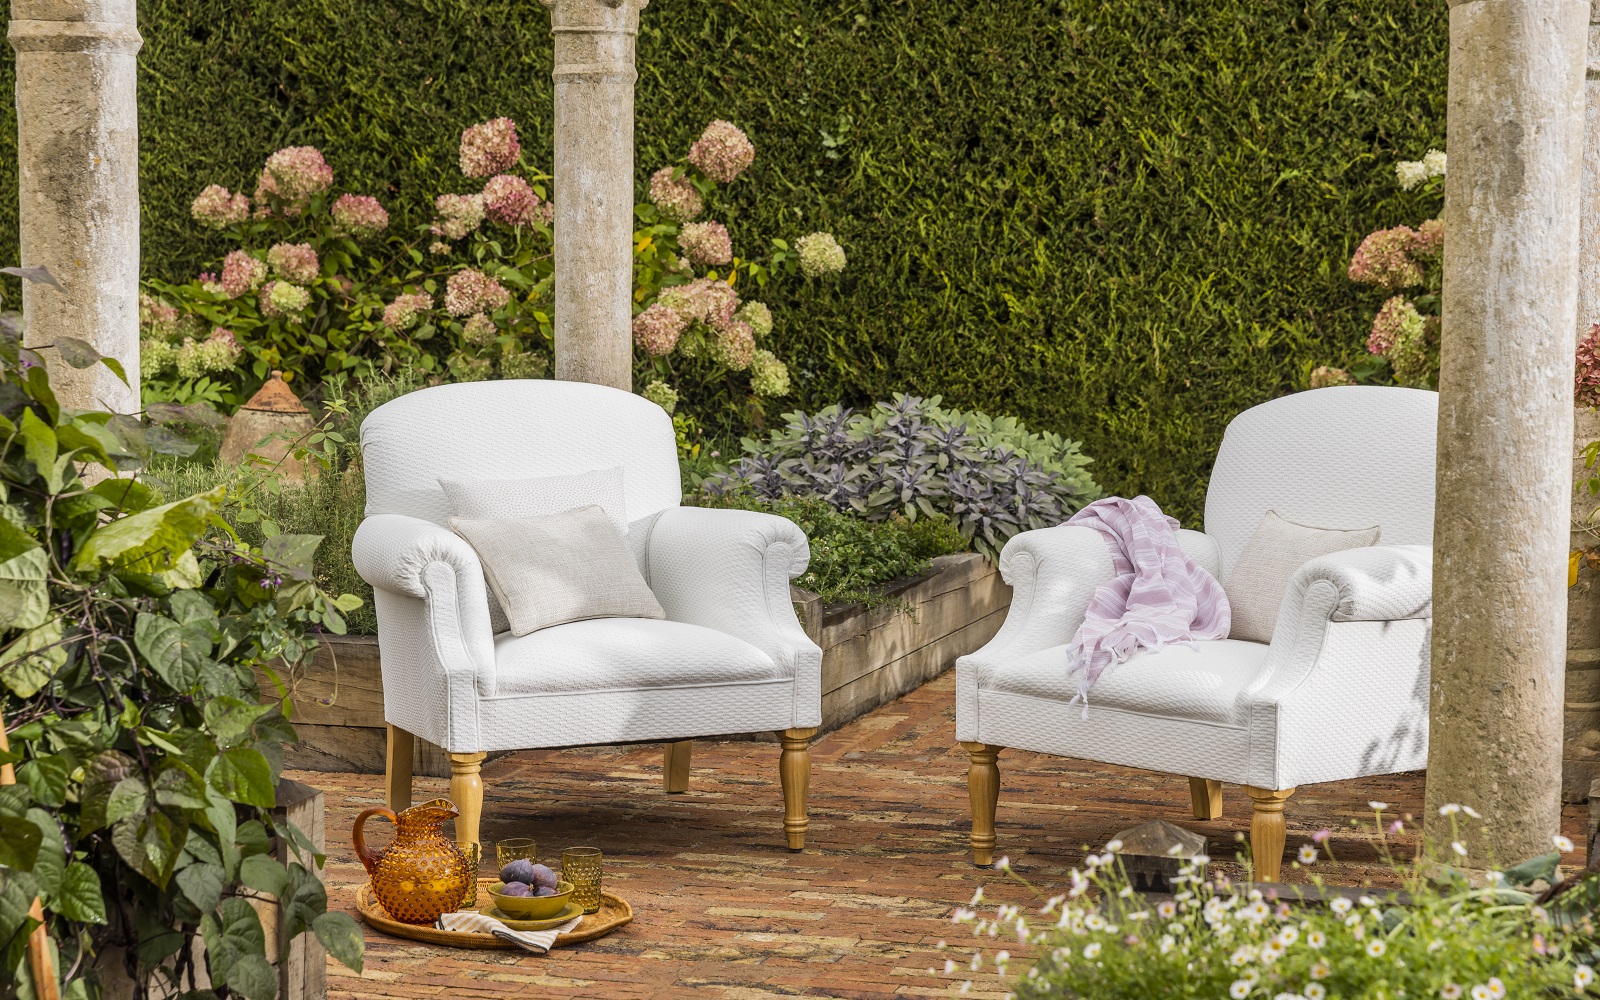 upholstered George Smith chairs in the garden with tea tray